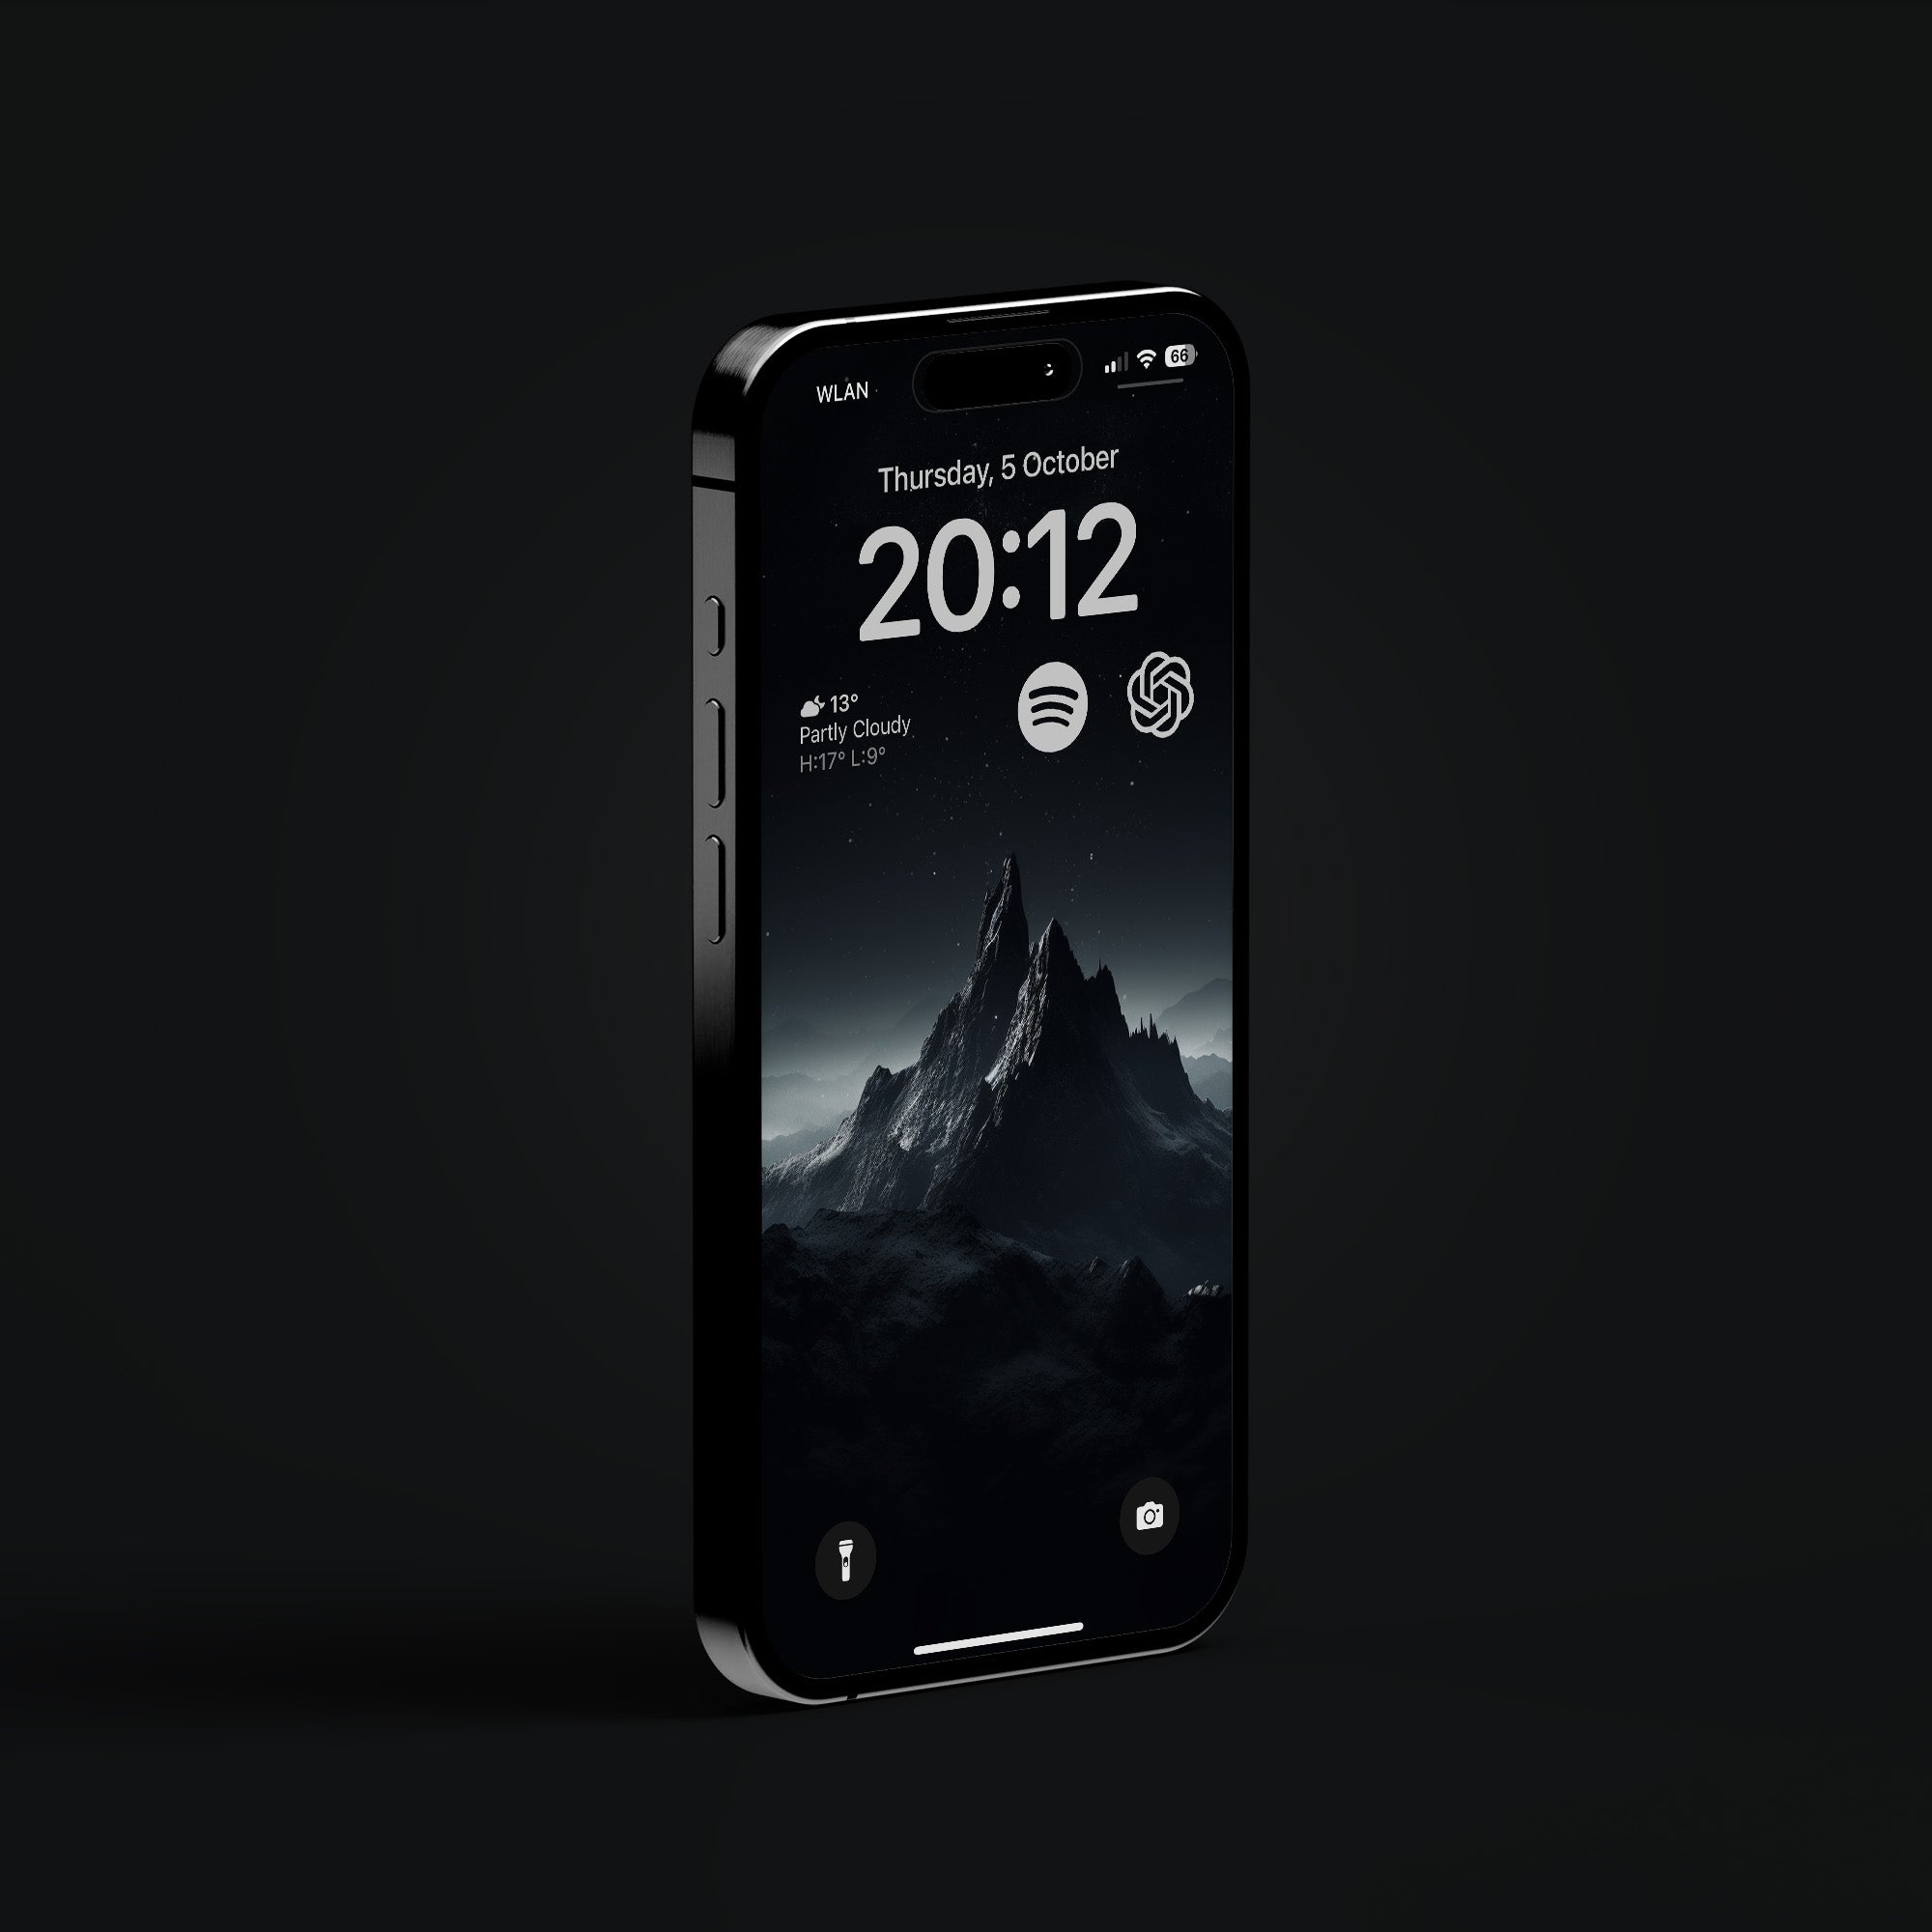 EDC Blackout iPhone Wallpapers for iPhone Pro Max